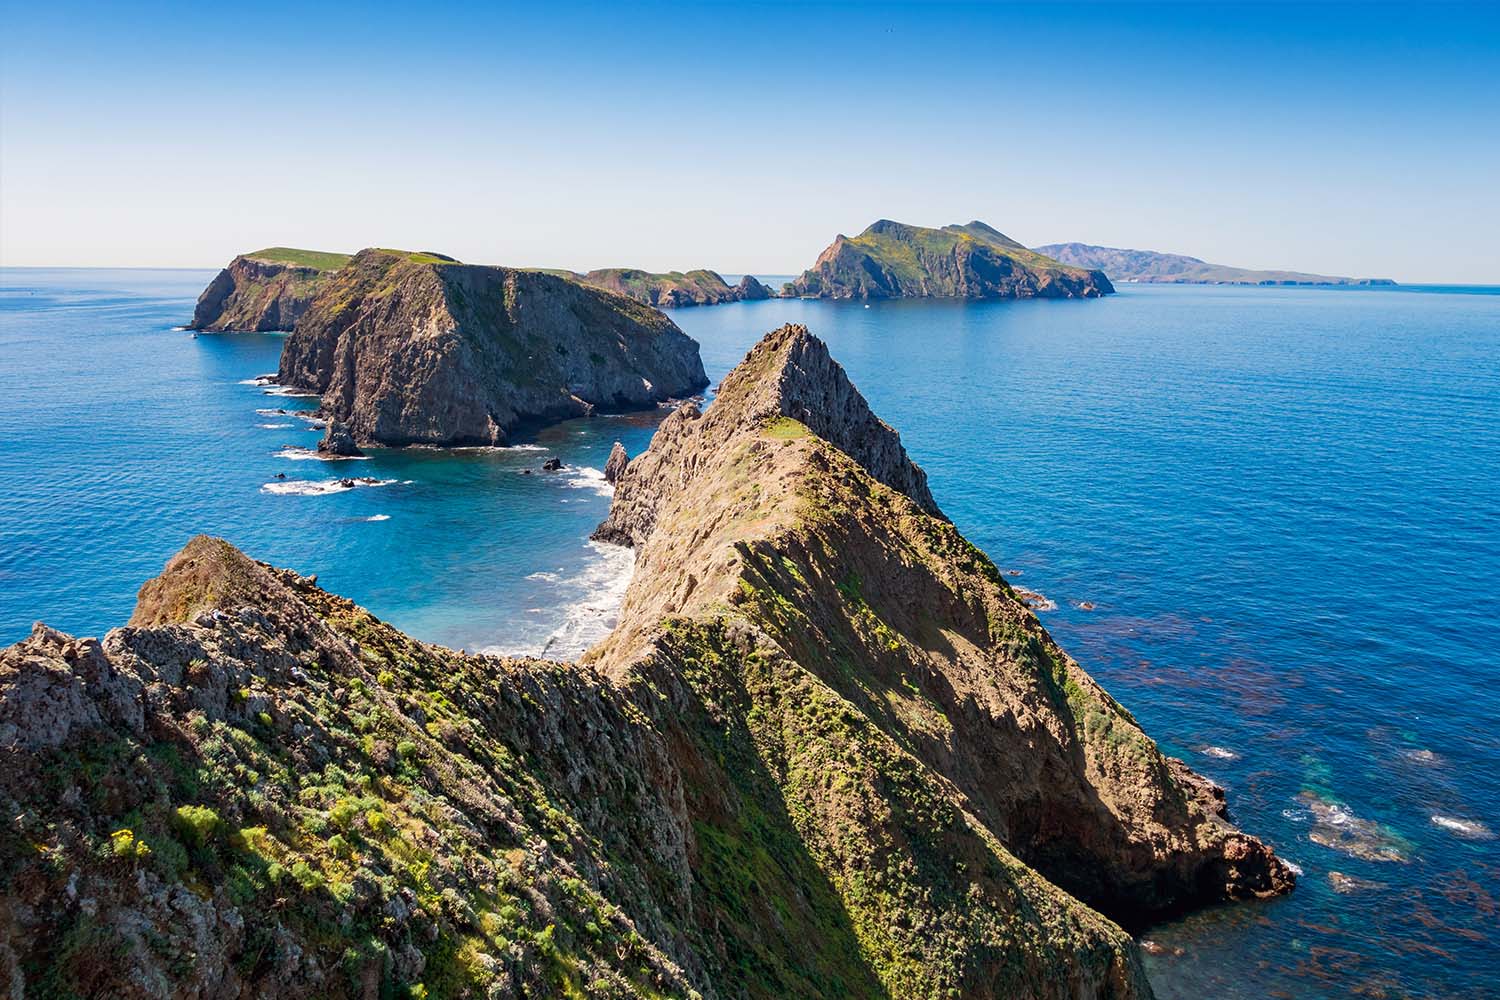 Inspiration Point on Anacapa Island in Channel Islands